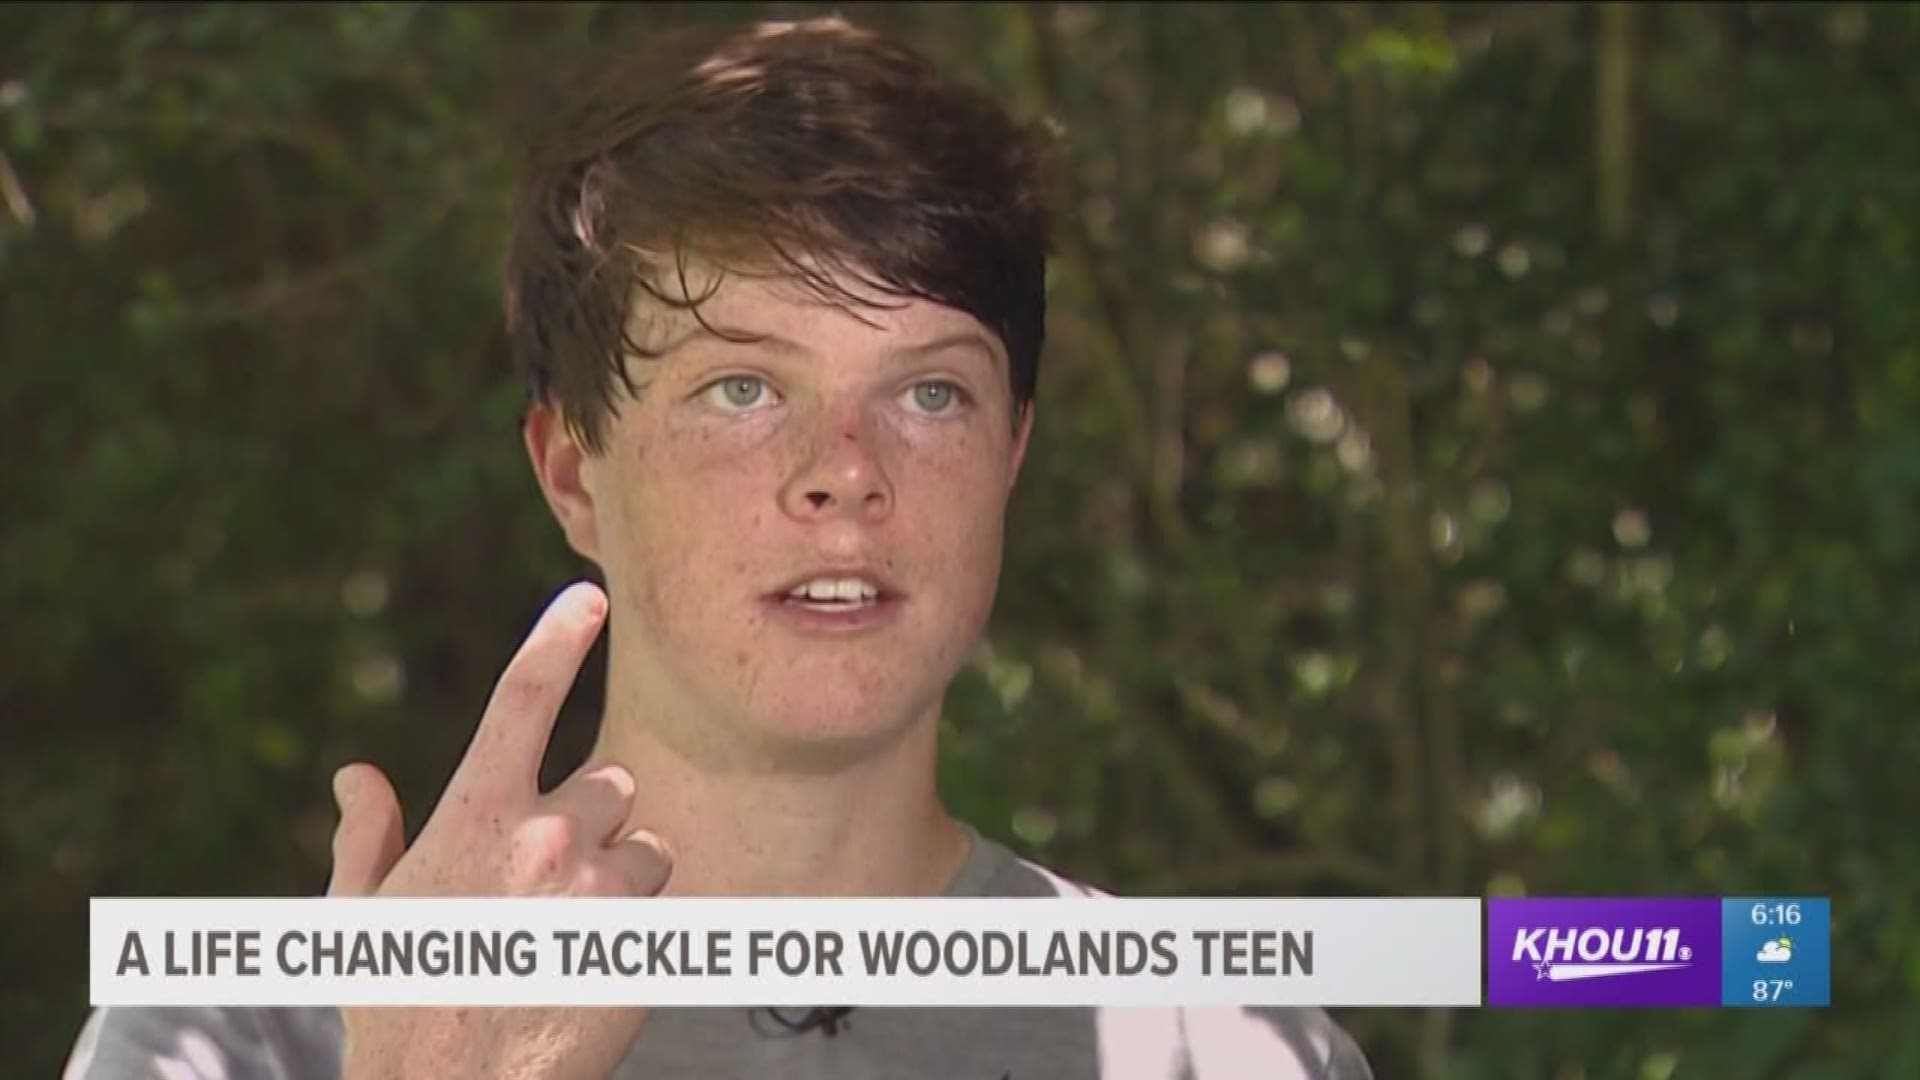 A teen in The Woodlands was doing what he loved when his life changed in an instant.